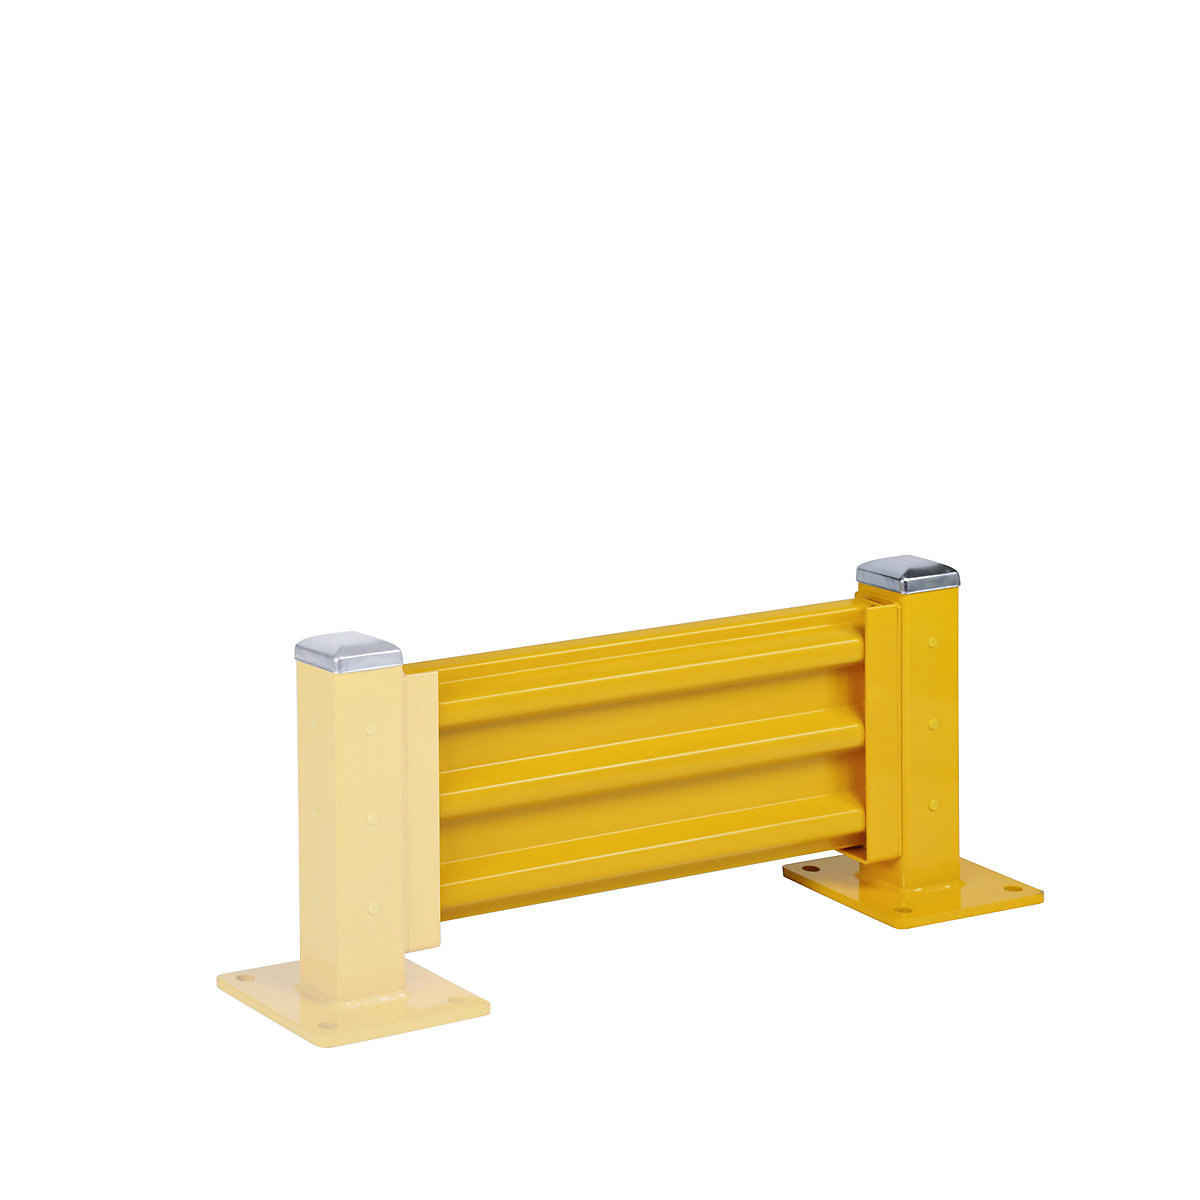 Crash protection wall, height 480 mm, 1 wall section, length 762 mm, extension section incl. 1 post